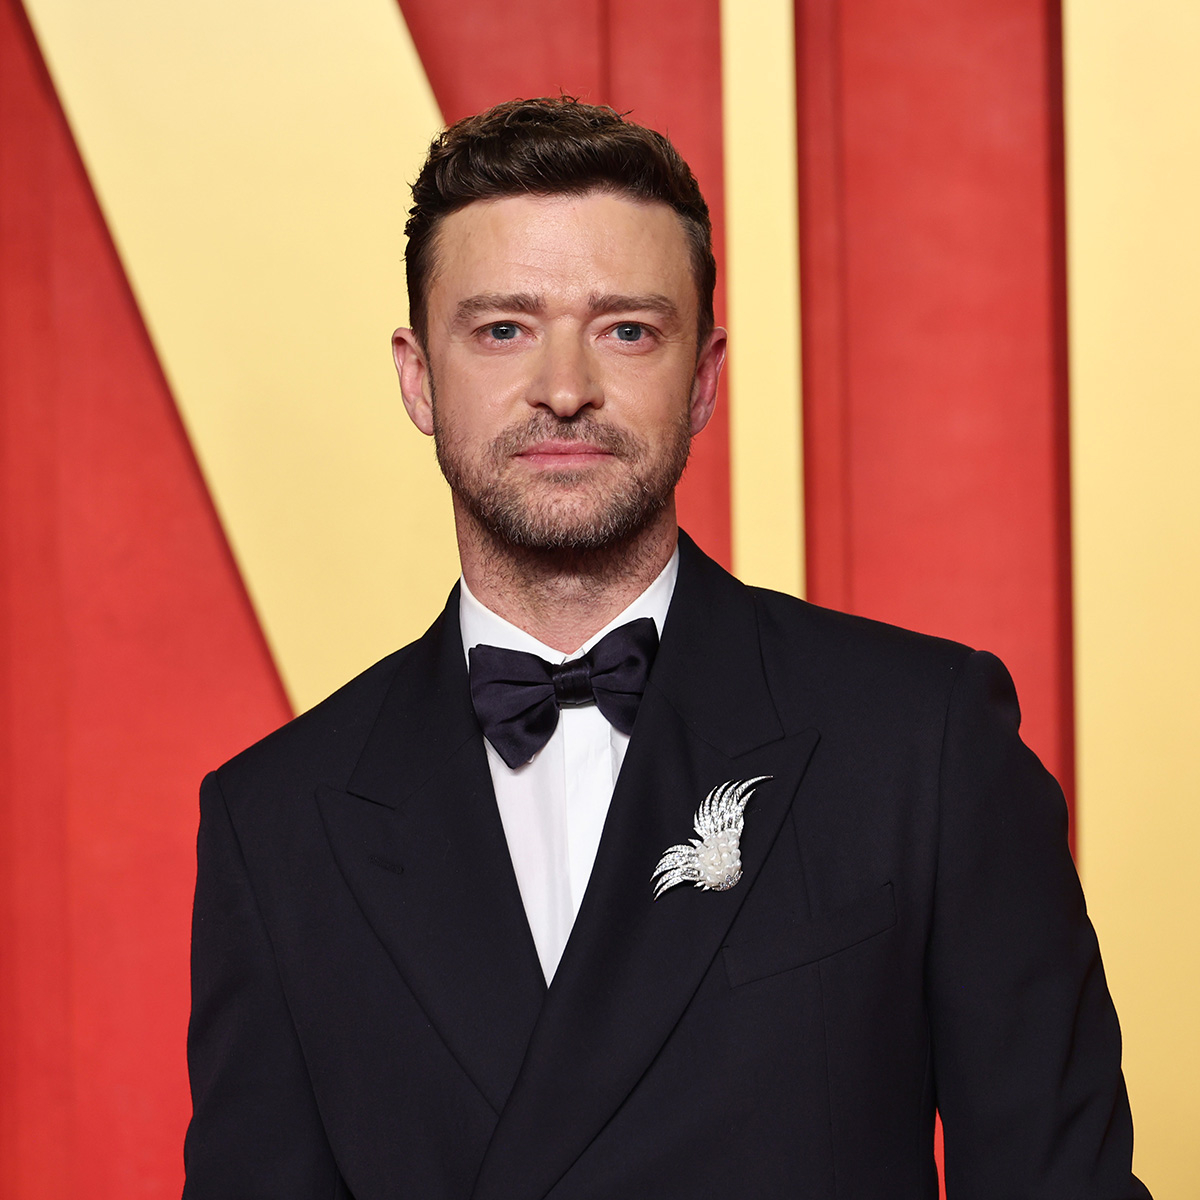 Justin Timberlake’s Attorney Speaks Out on DWI Arrest